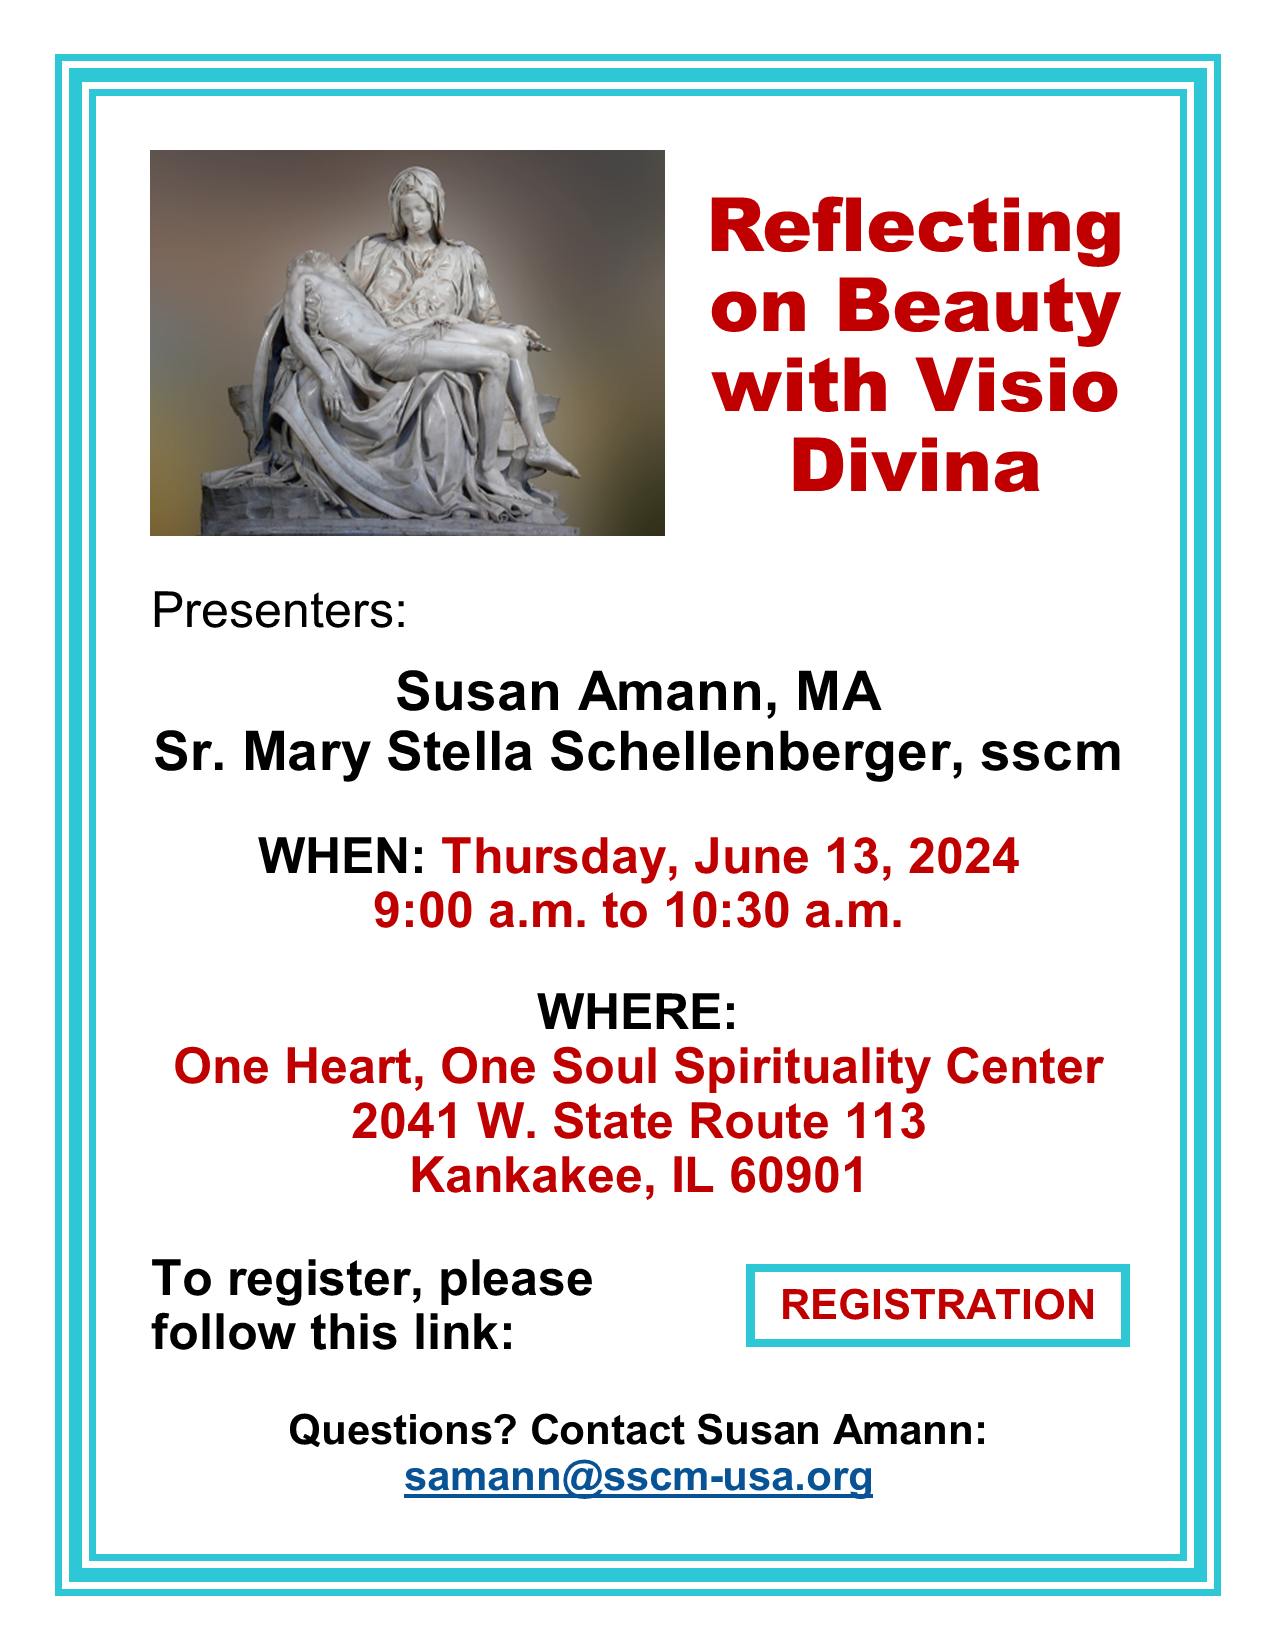 Reflecting on Beauty with Visio Divina: Click here to register